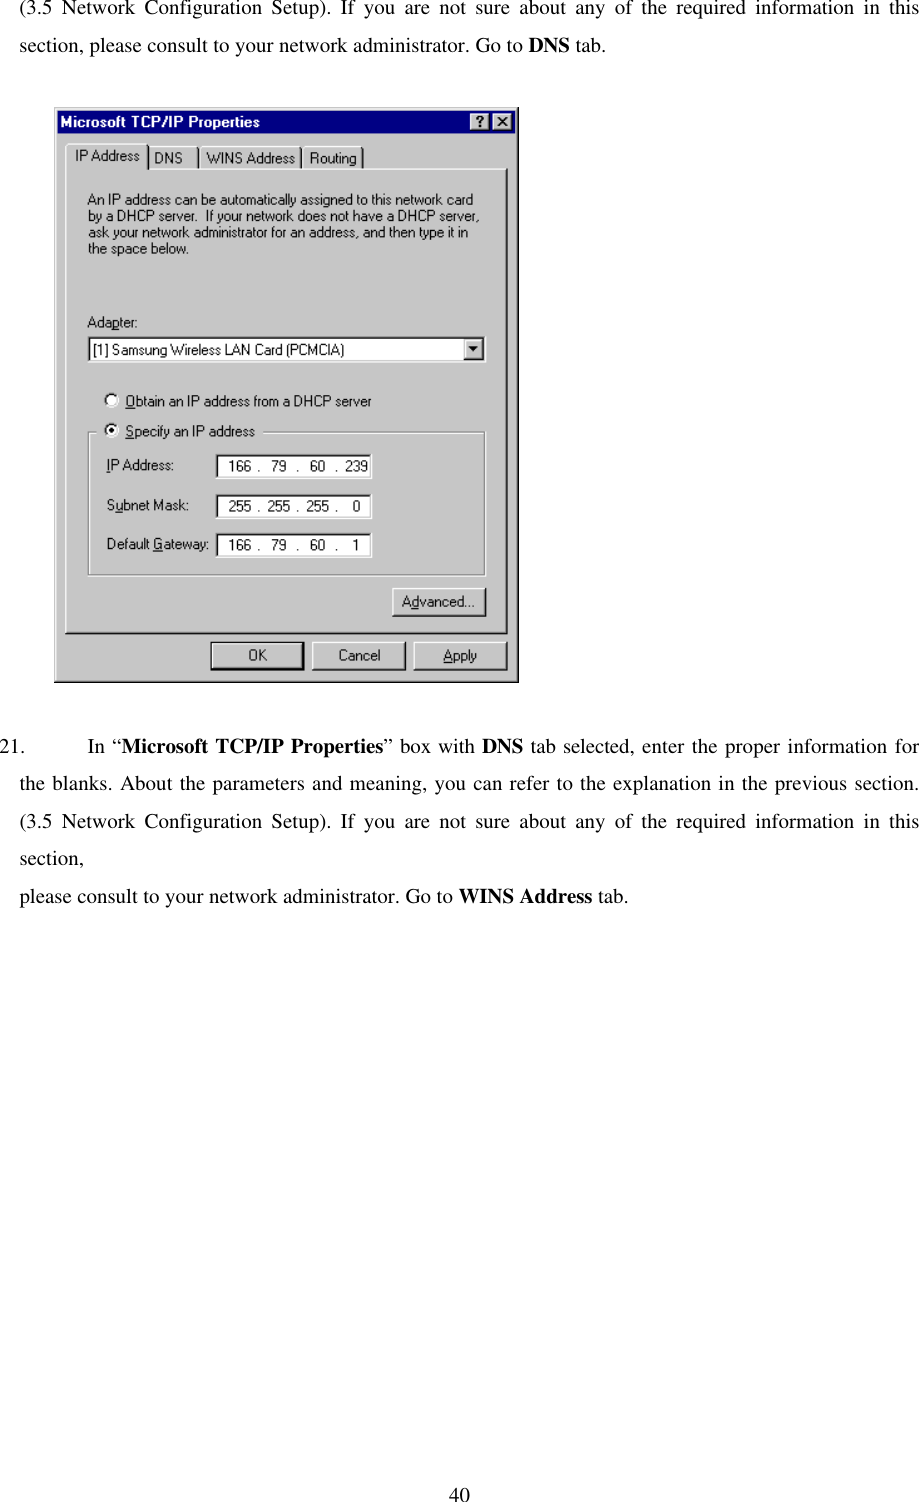 40(3.5 Network Configuration Setup). If you are not sure about any of the required information in thissection, please consult to your network administrator. Go to DNS tab.          21. In “Microsoft TCP/IP Properties” box with DNS tab selected, enter the proper information forthe blanks. About the parameters and meaning, you can refer to the explanation in the previous section.(3.5 Network Configuration Setup). If you are not sure about any of the required information in thissection,please consult to your network administrator. Go to WINS Address tab.